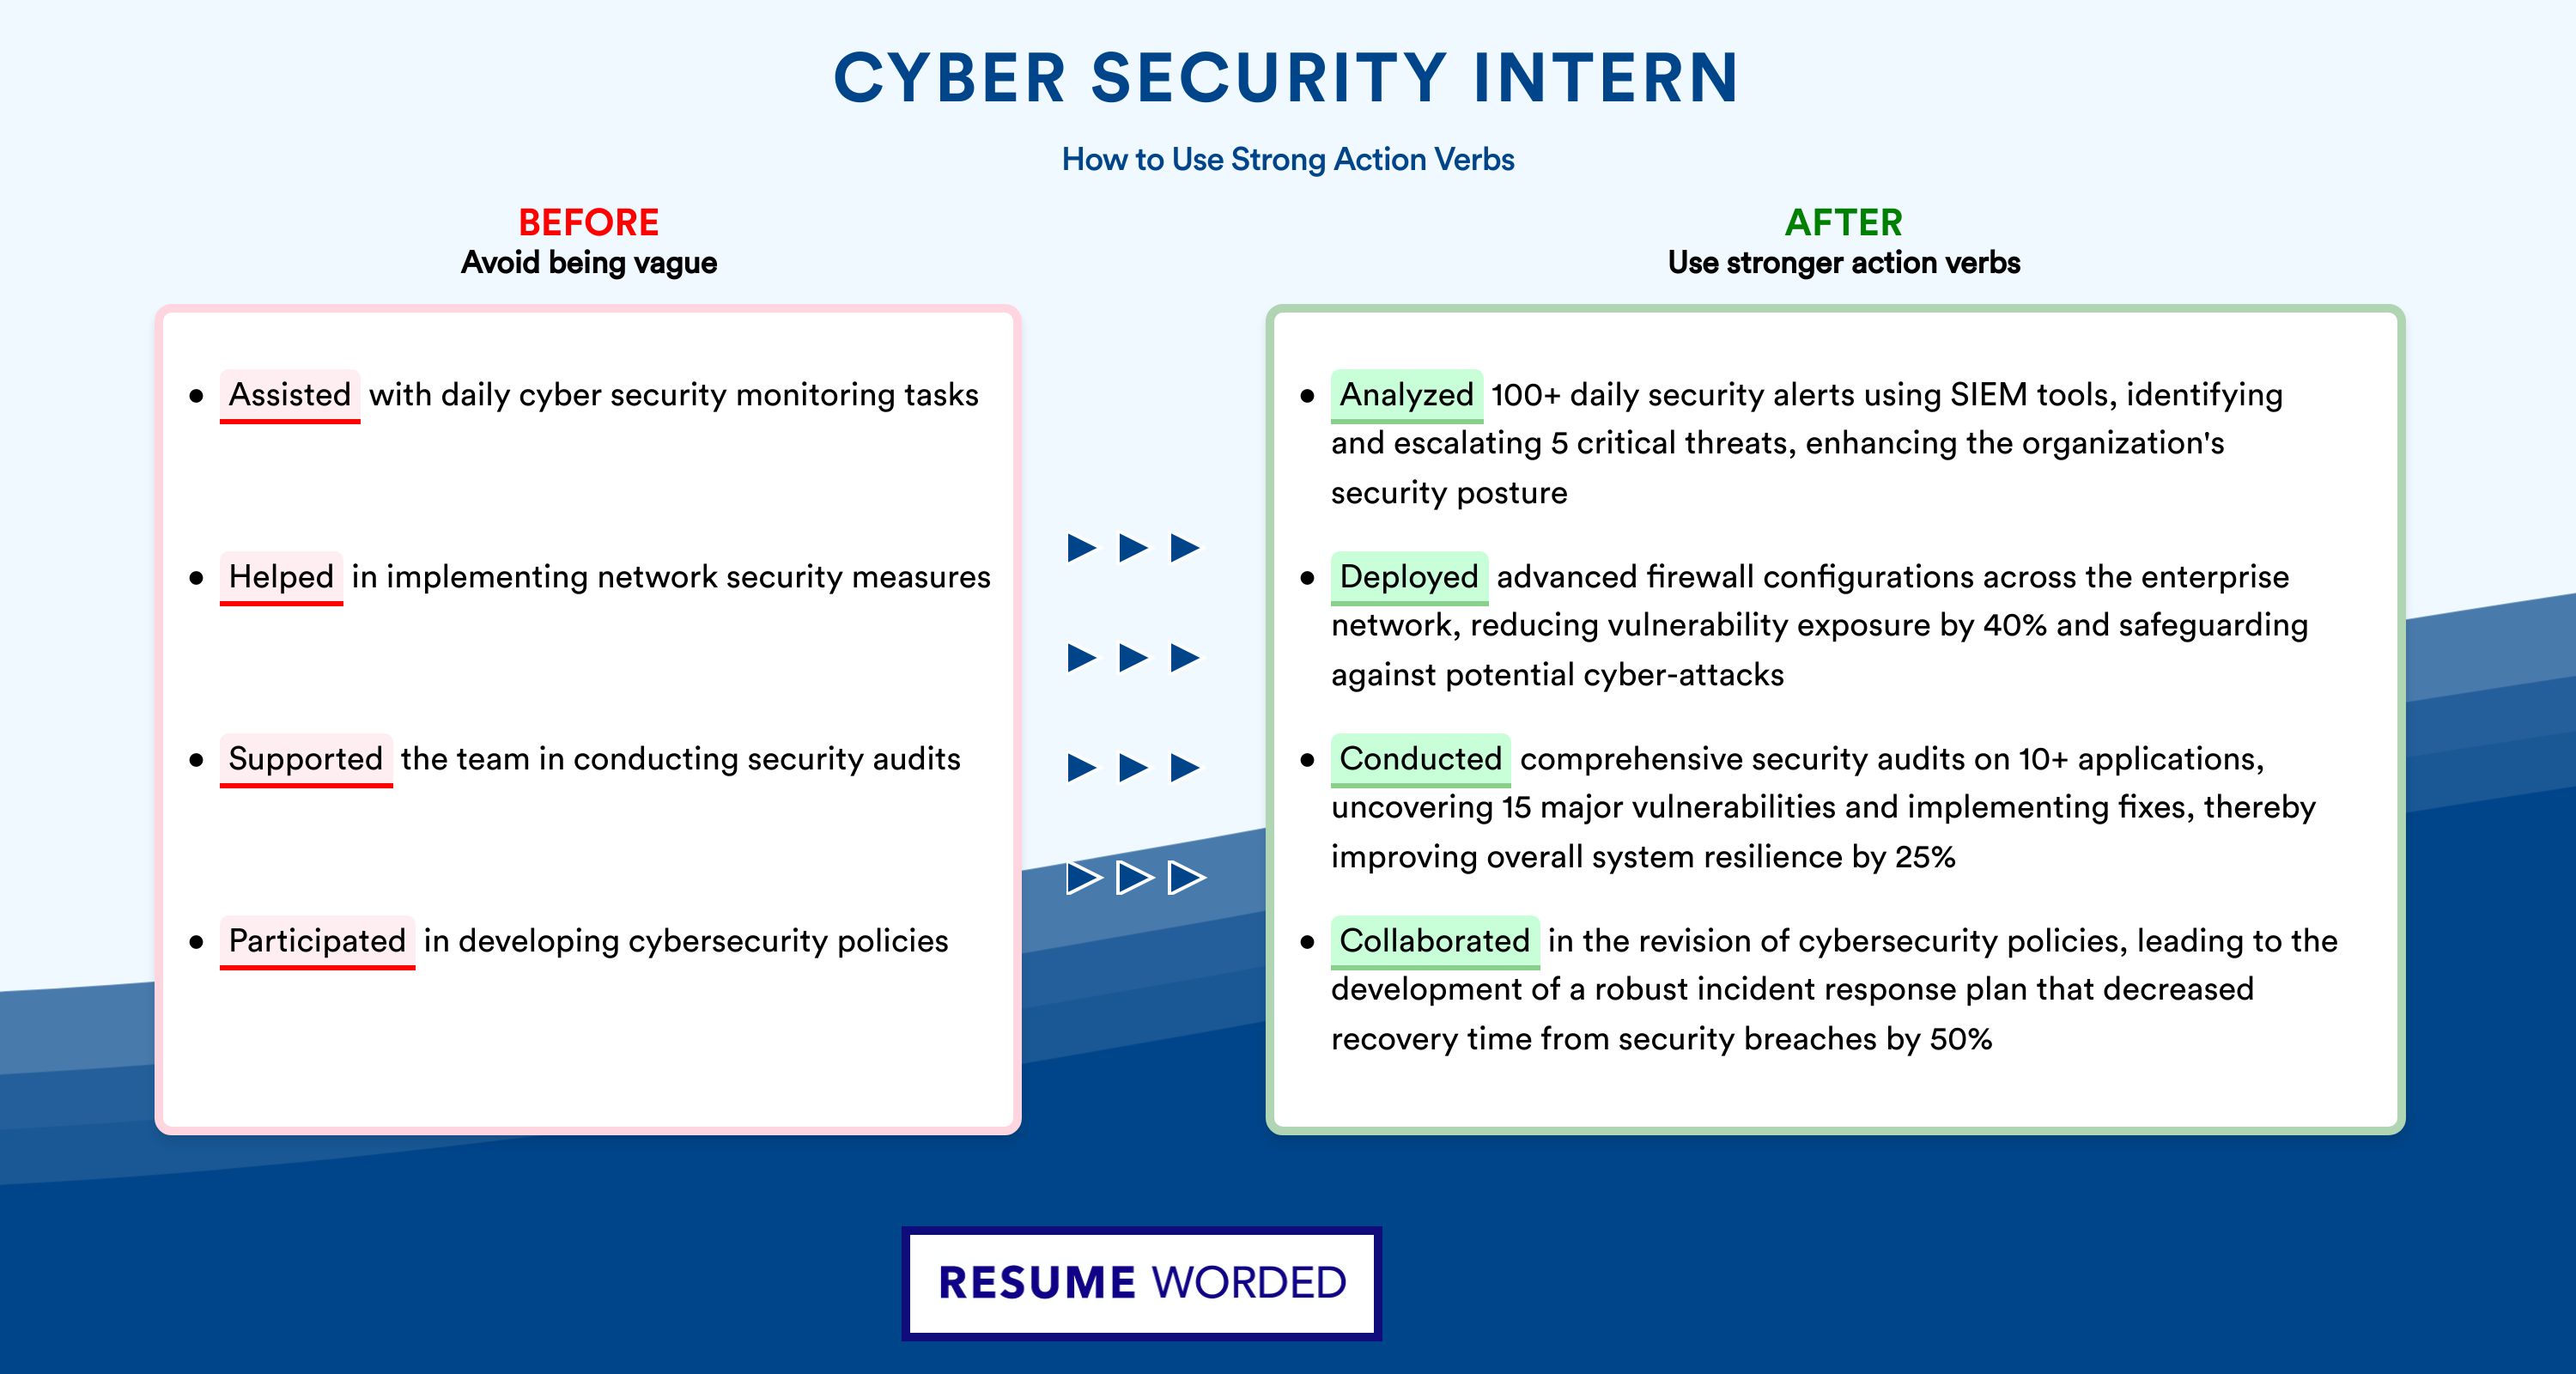 Action Verbs for Cyber Security Intern